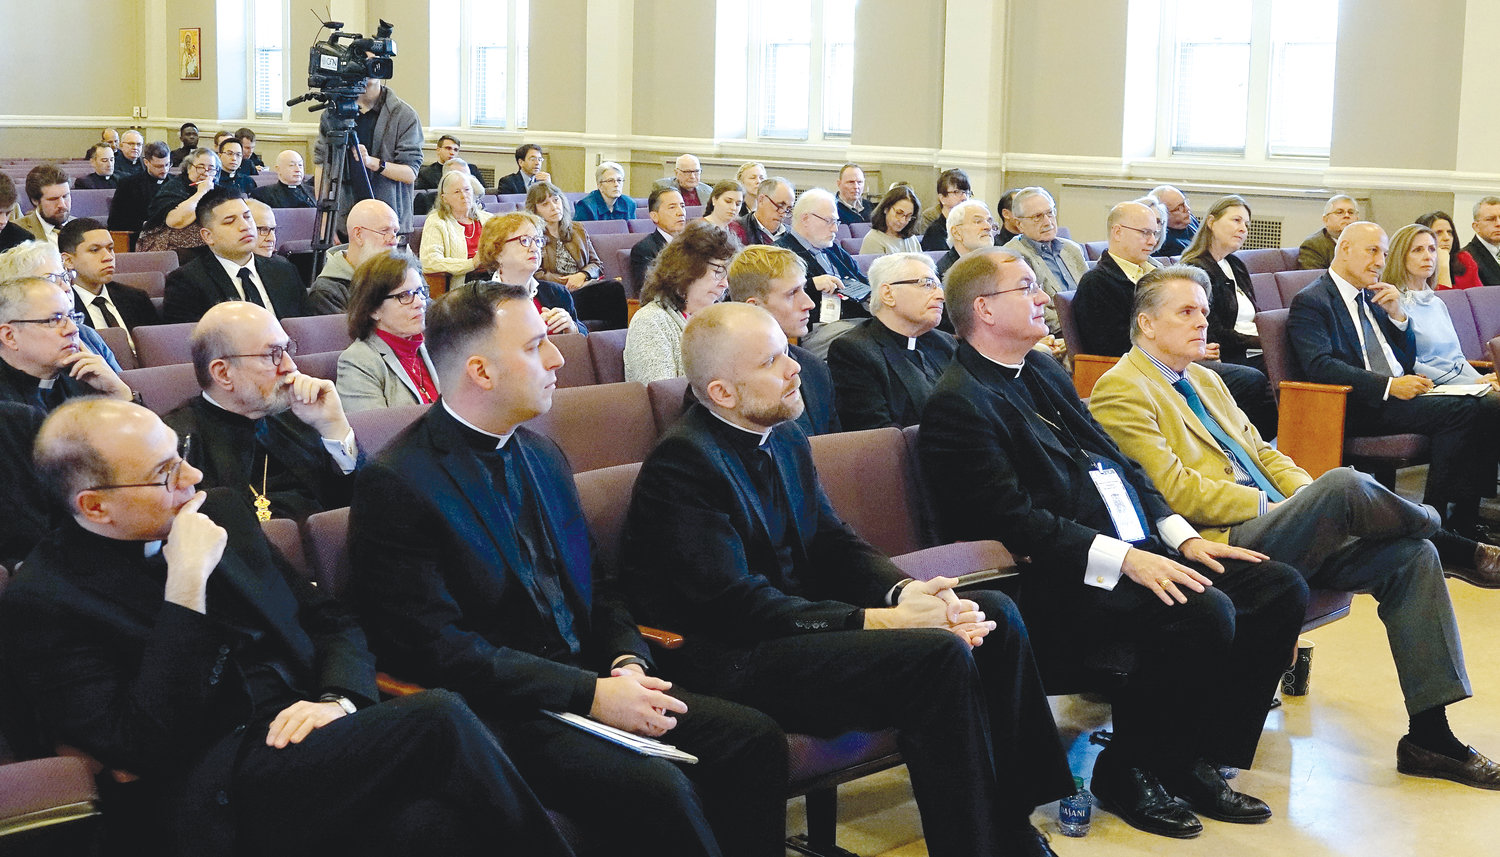 SEMINARY GATHERING—Bishop John Barres of Rockville Centre, second from right, sits beside presenter Edward Short at the symposium on St. John Henry Newman at St. Joseph’s Seminary in Dunwoodie Nov. 1-2, 2019.